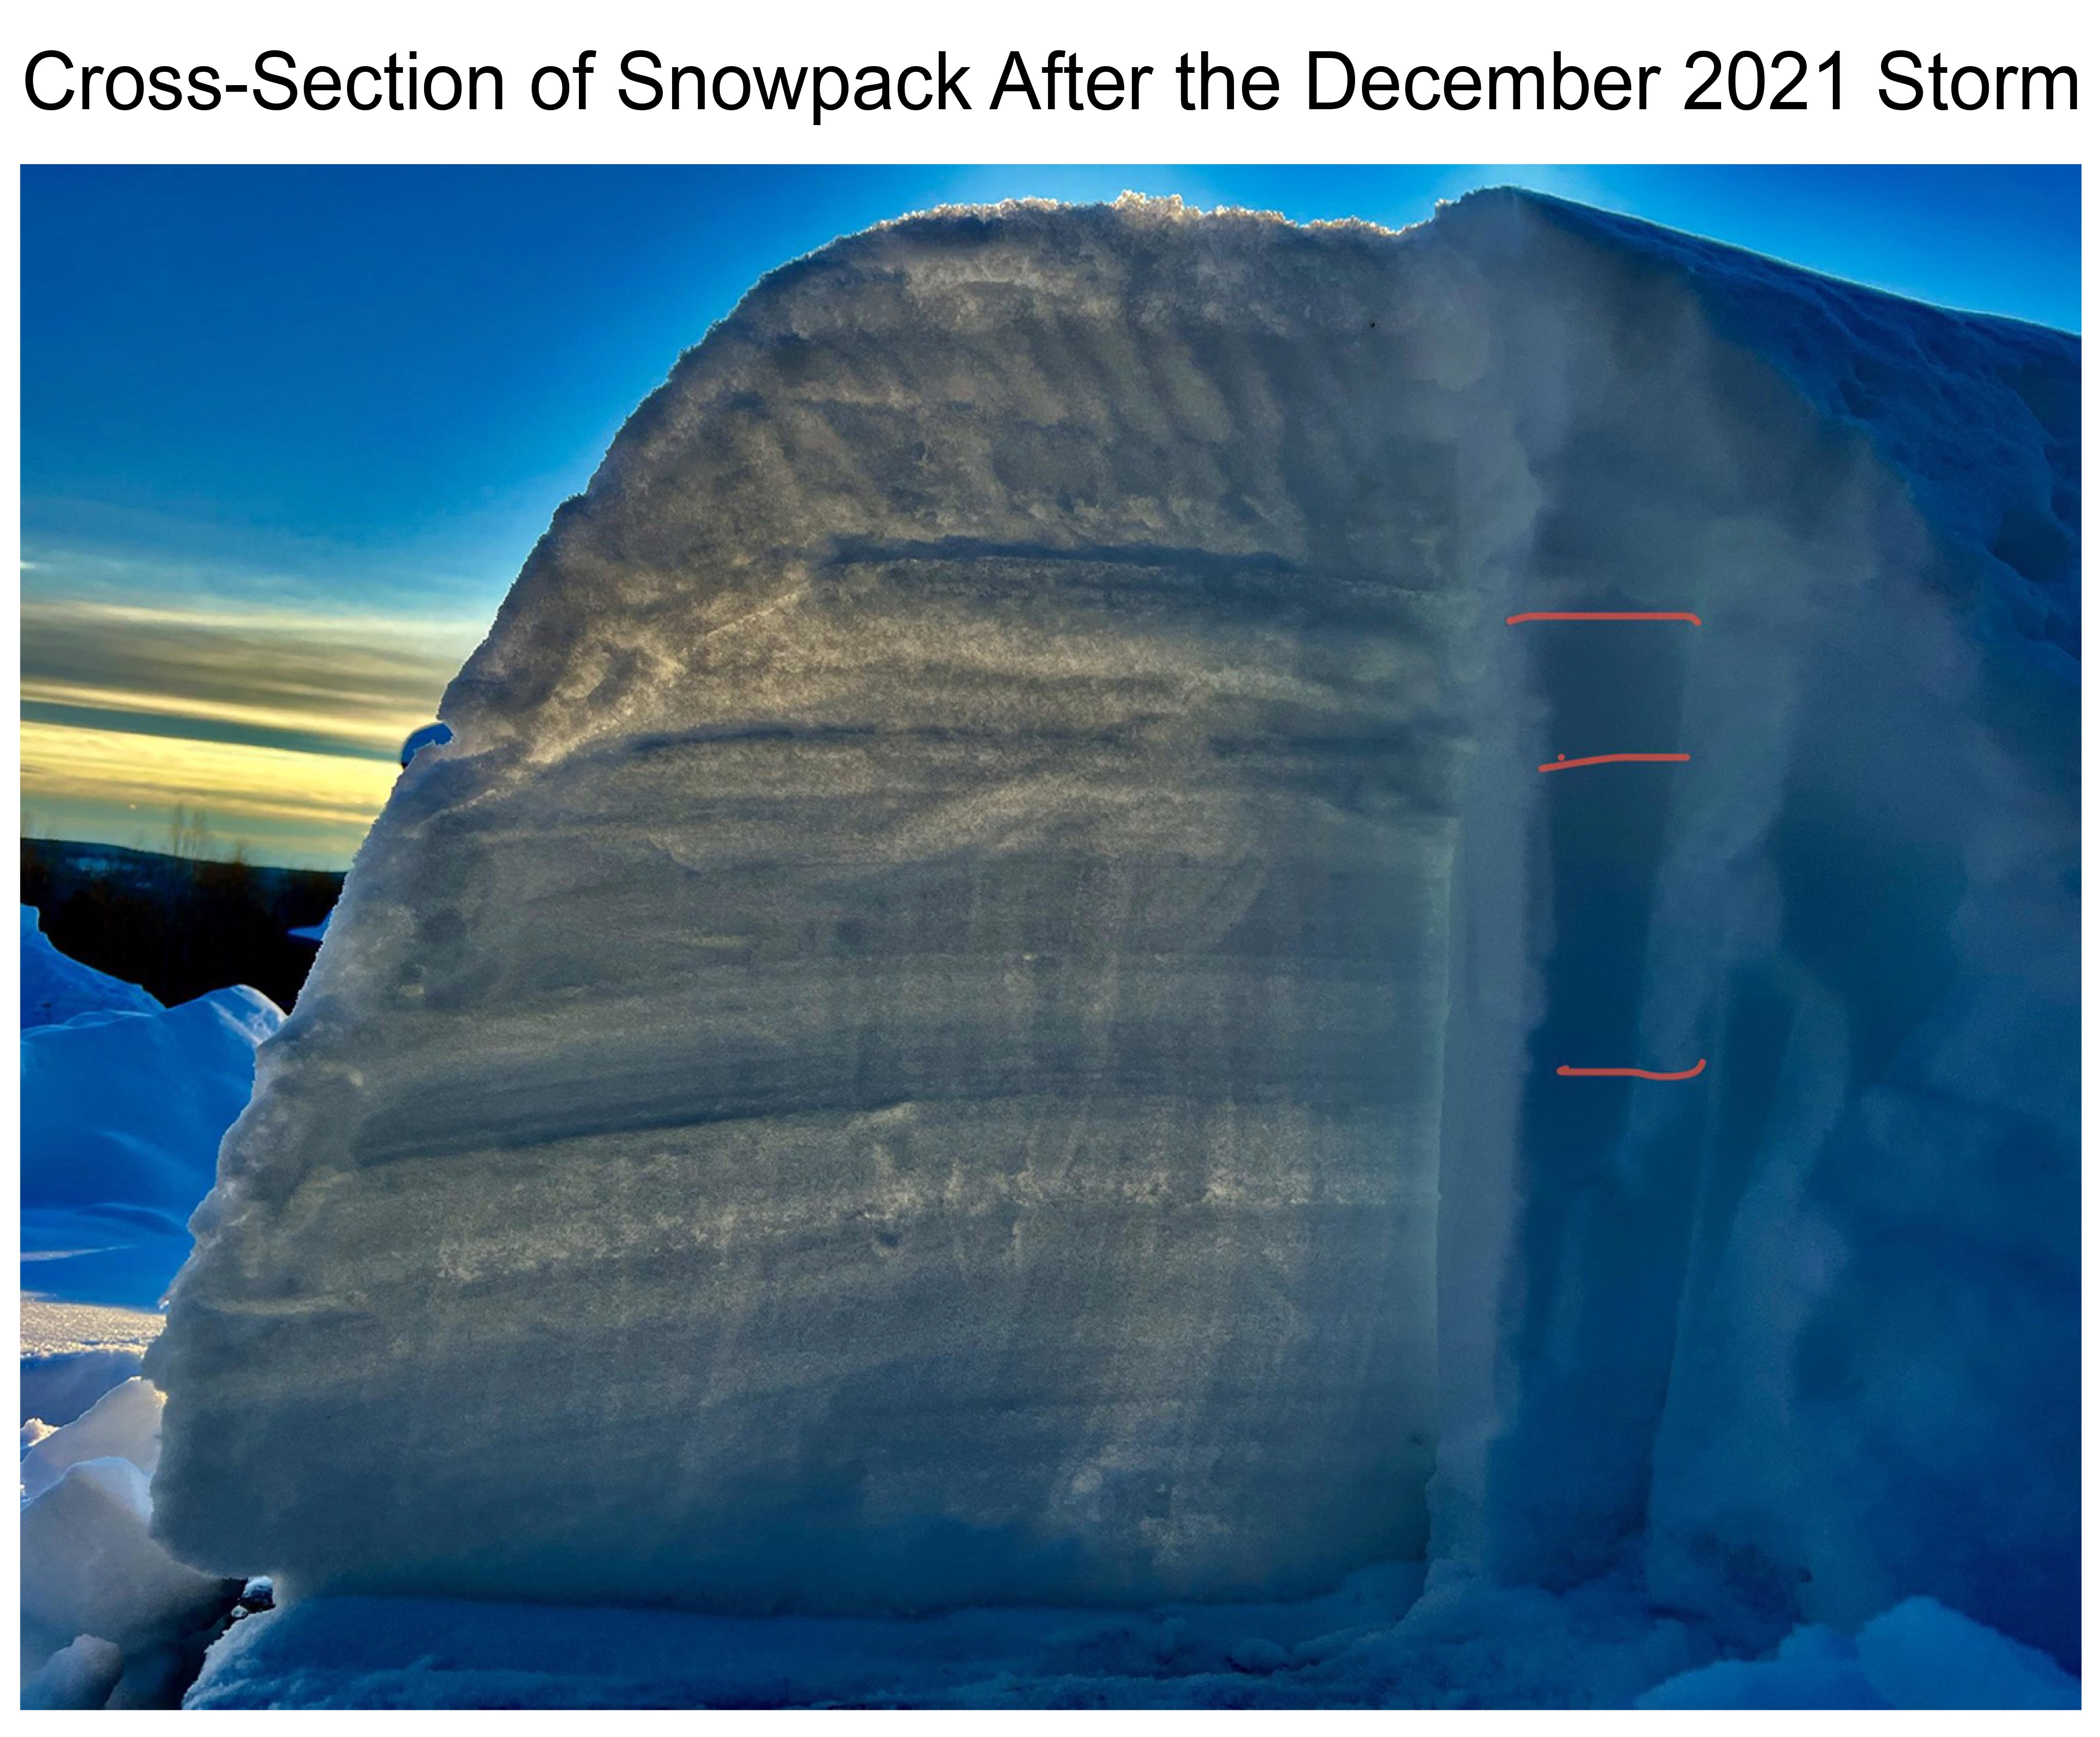 Cross-Section of Snowpack After the December 2021 Storm